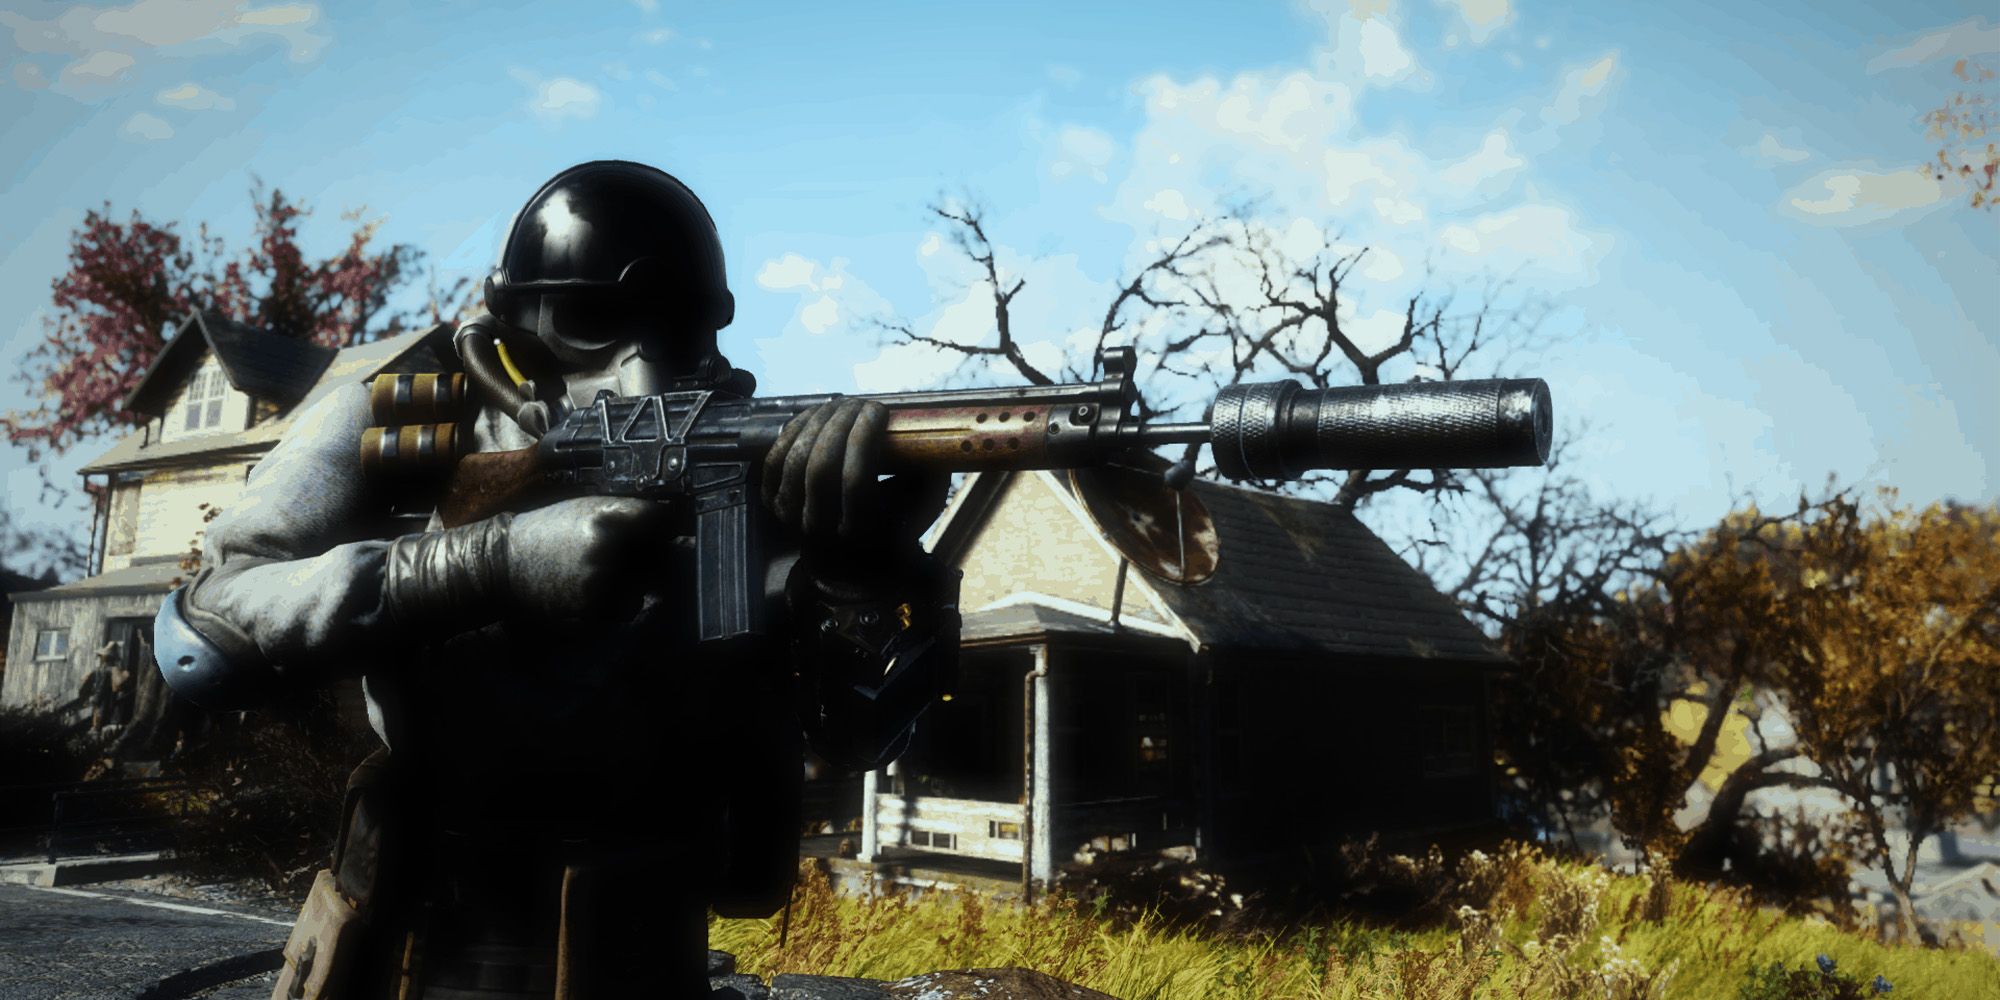 The main character wearing Combat Armor and using a silenced Combat Rifle for a Bloodied Ranged Build in Fallout 76.